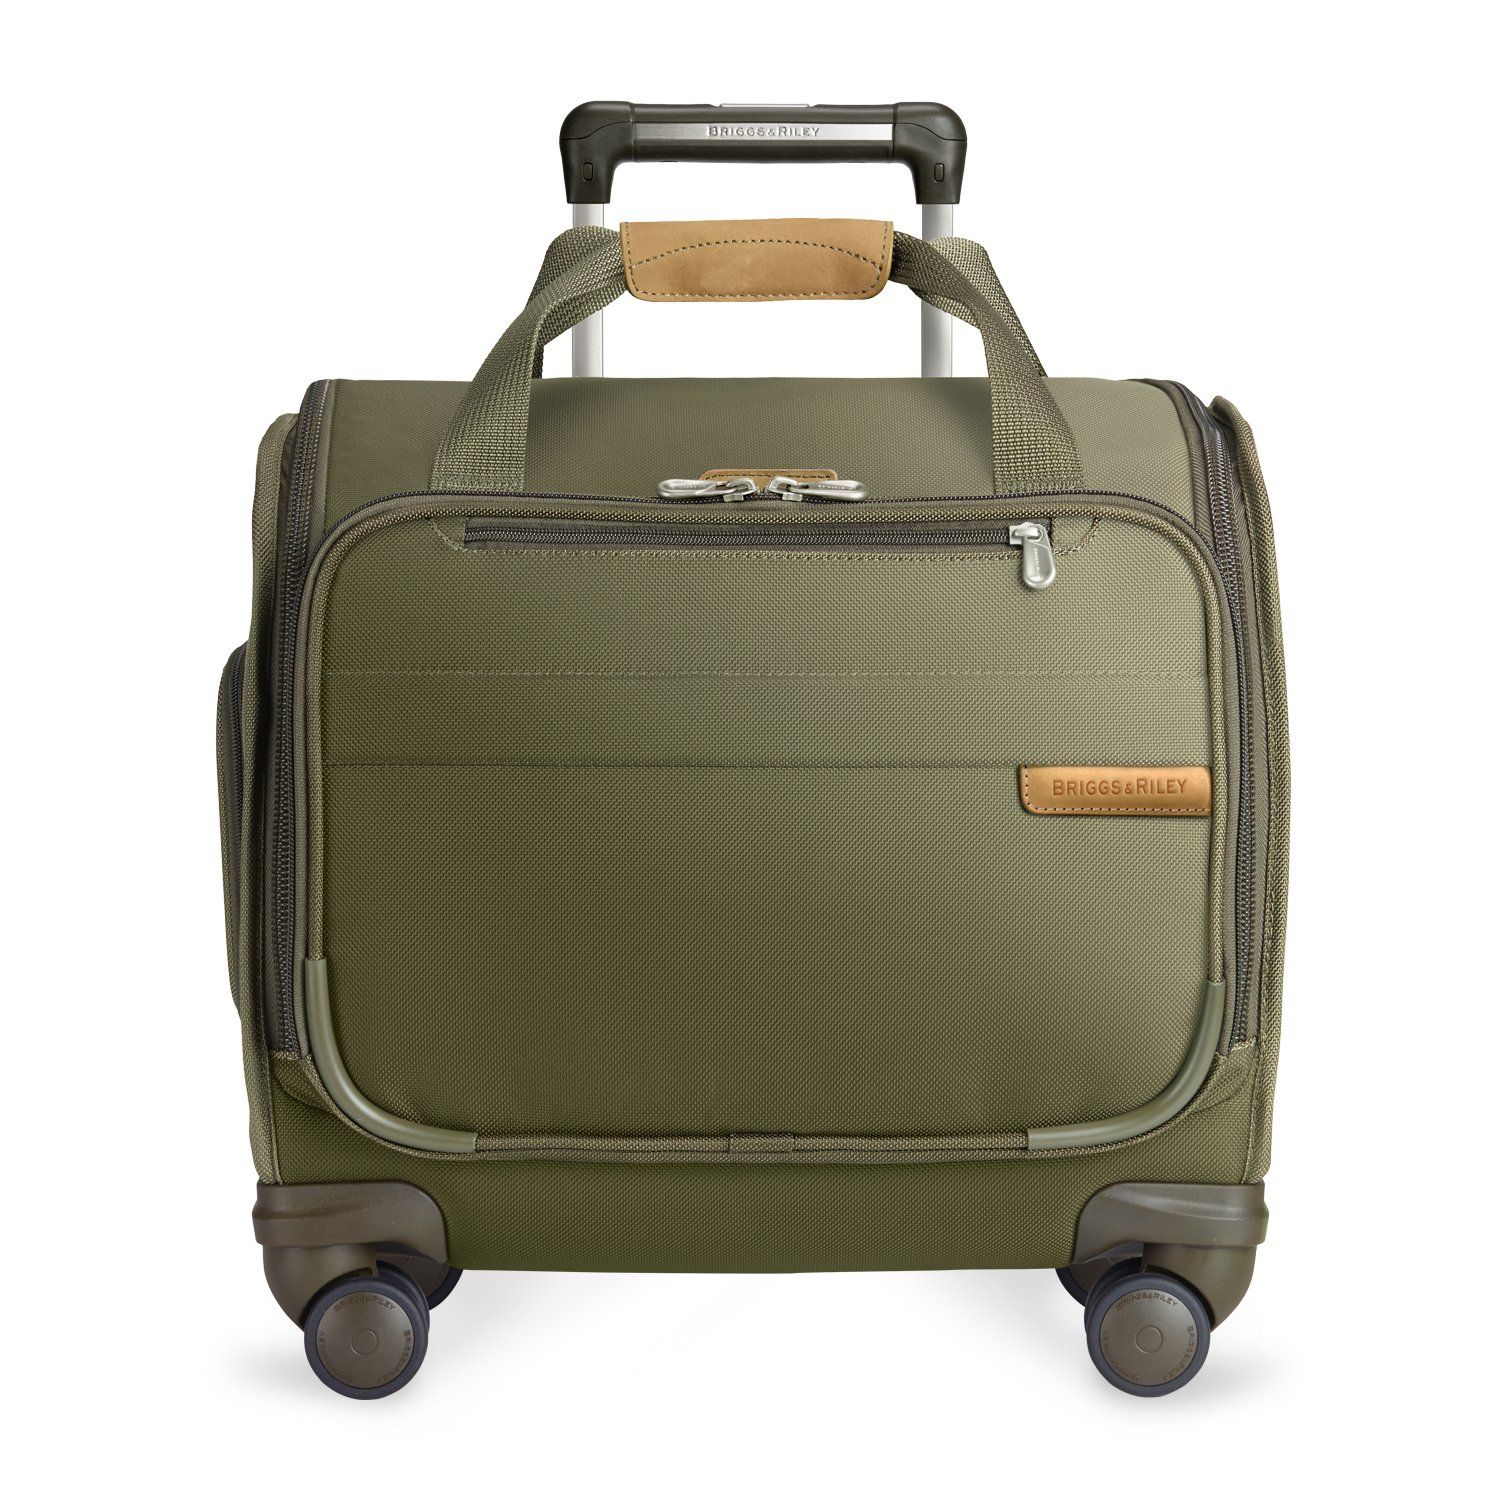 The versatility of a Rolling Cabin Bag and the effortless 360° navigation of four double swivel wheels, all rolled into one. Perfect for carrying on board and laying flat under most airline seats or in the overhead compartment. Key features include: Front gusseted organiser compartment with a padded pocket for iPad® or tablet and additional room for power adapters/cords, magazines and files. Roomy, open-mouth main compartment allows bag to be easily packed and organised - open-mouth main compartment allows bag to be easily packed and organised. Easily access water bottle zipper pocket. Outsider® handle provides flat interior surface for wrinkle-free packing.